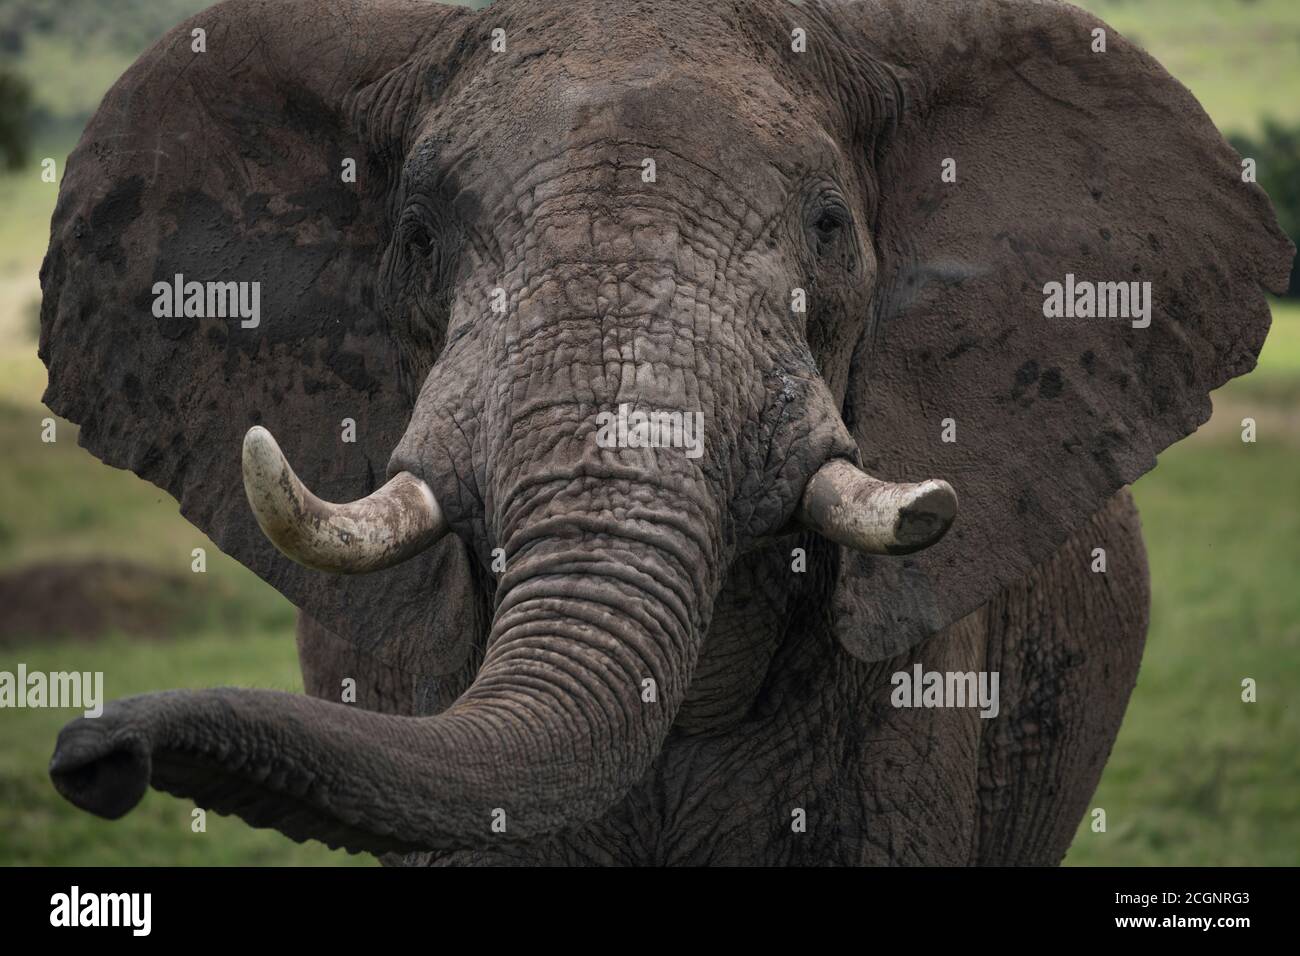 An African bush elephant (Loxodonta africana), the largest living land creature, in the Maasai Mara National Reserve in Kenya. Stock Photo